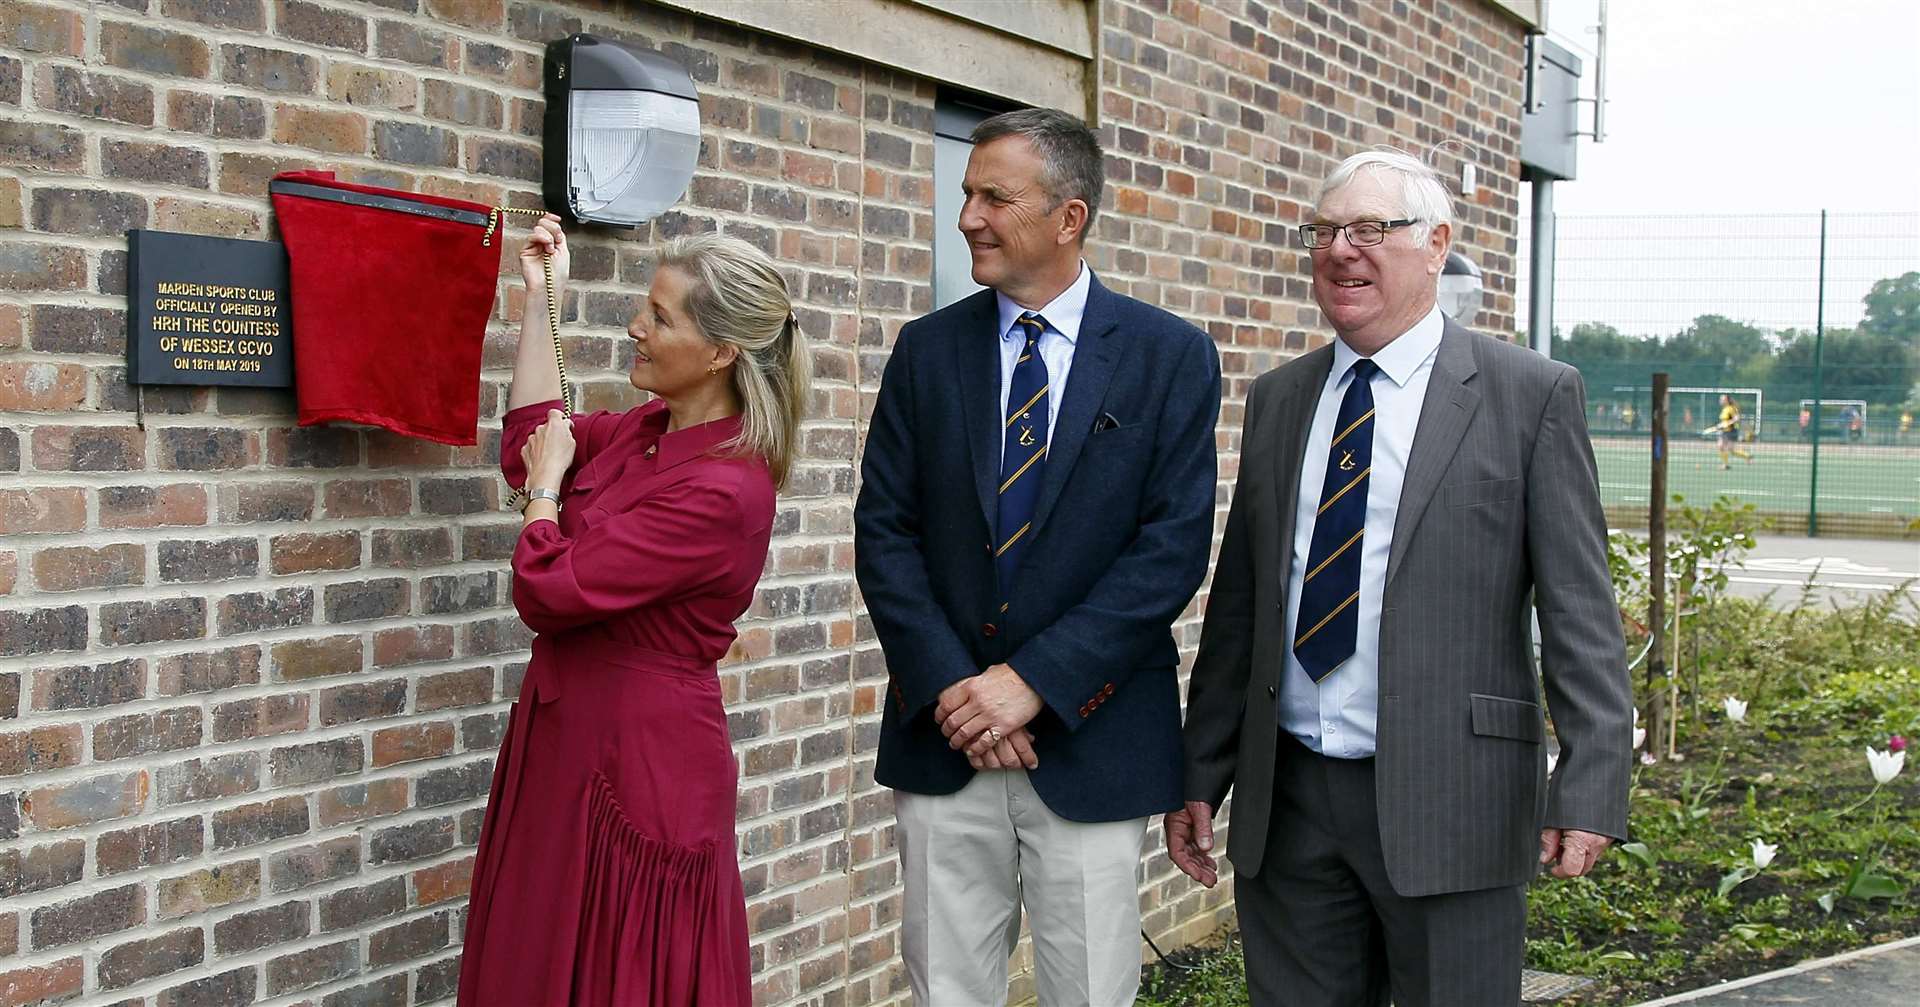 Sophie Countess of Wessex unveils the plaque watched by club president Frank Tipples and Clive Baxter